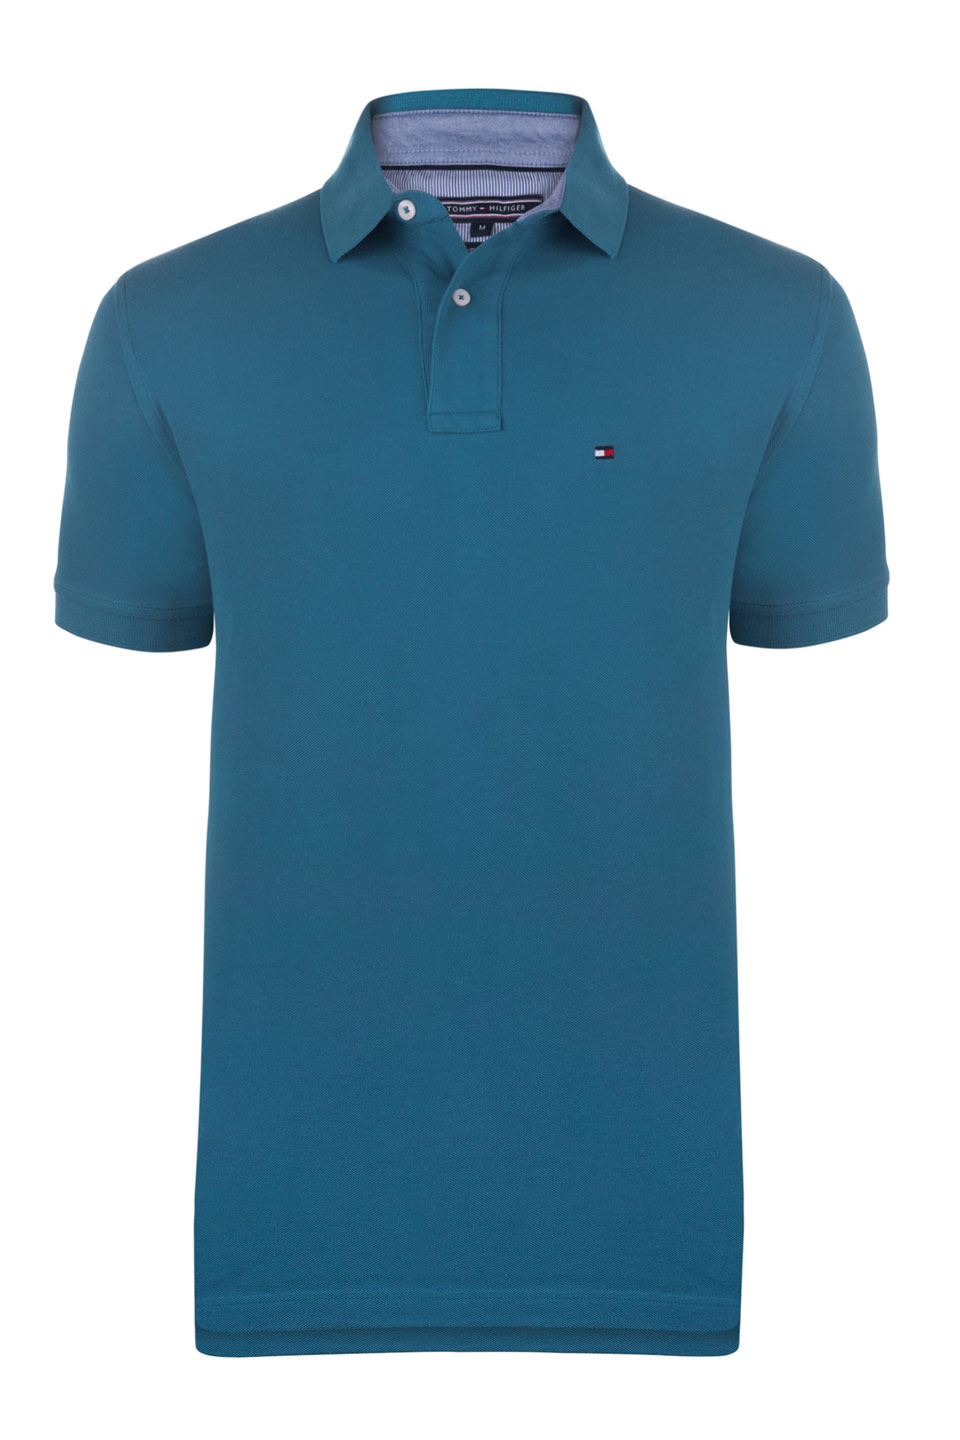 Tommy Hilfiger Slim Fit Short Sleeve Polo Shirt in Petrol - ClipArt ...